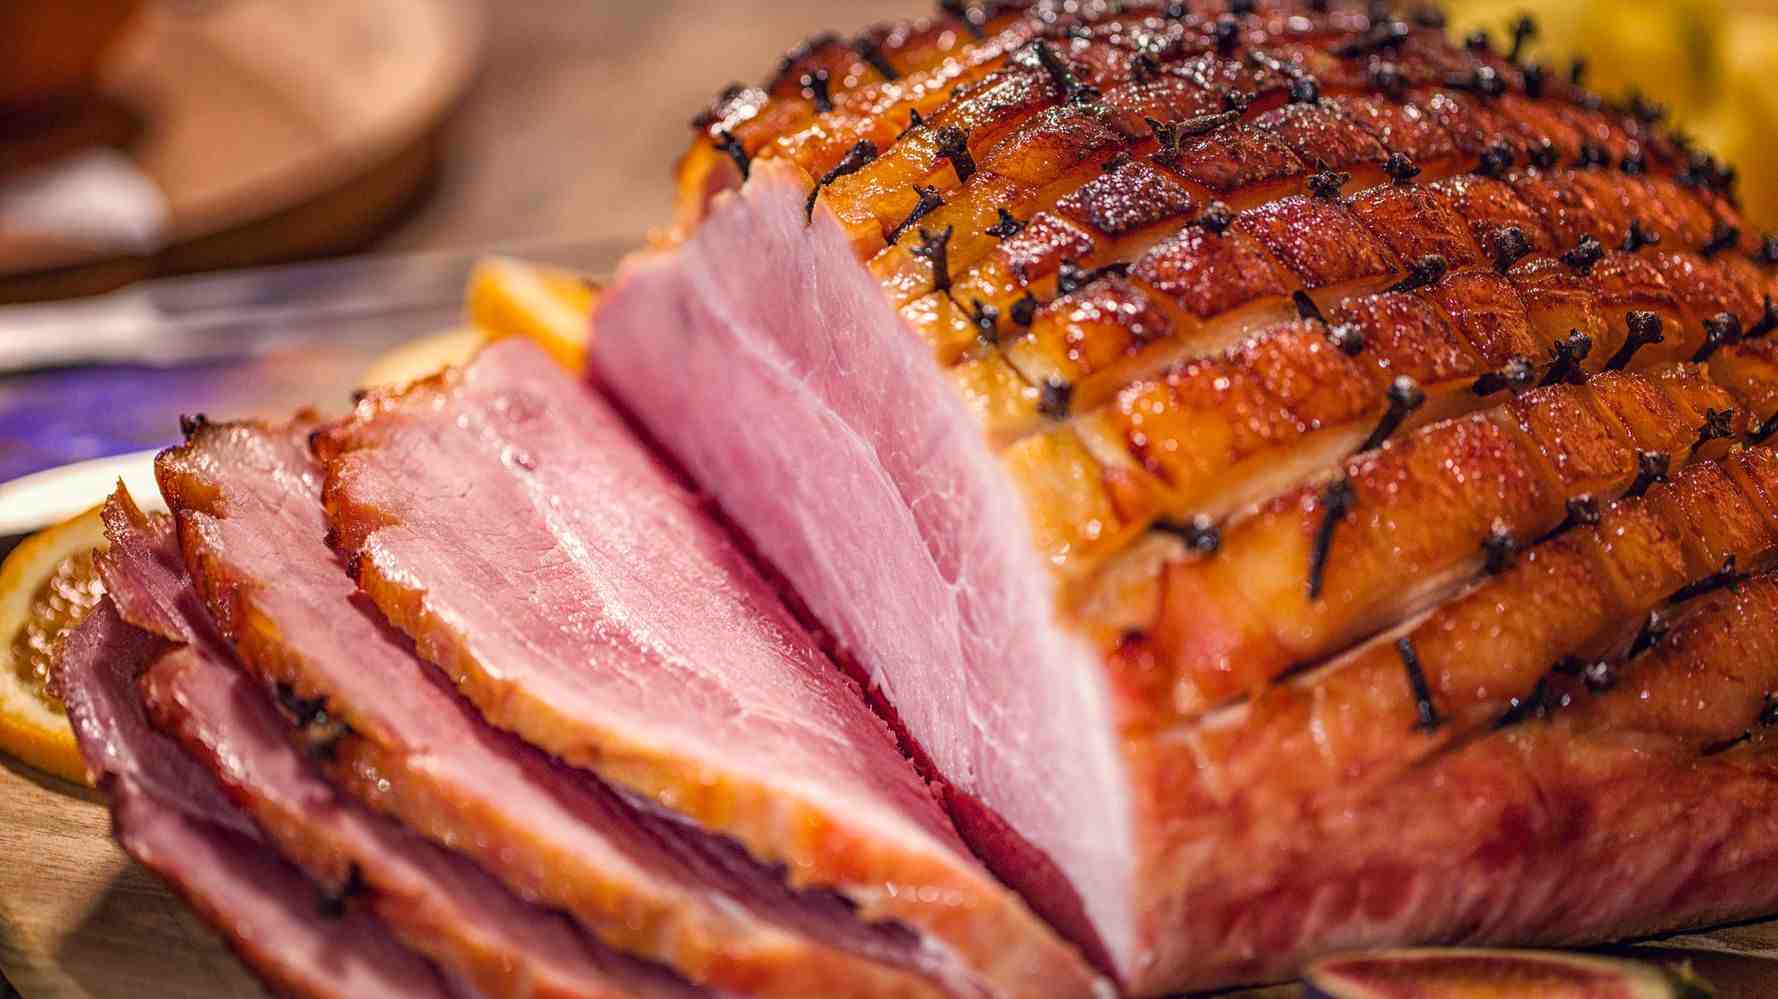 Should you cover a ham when baking it?